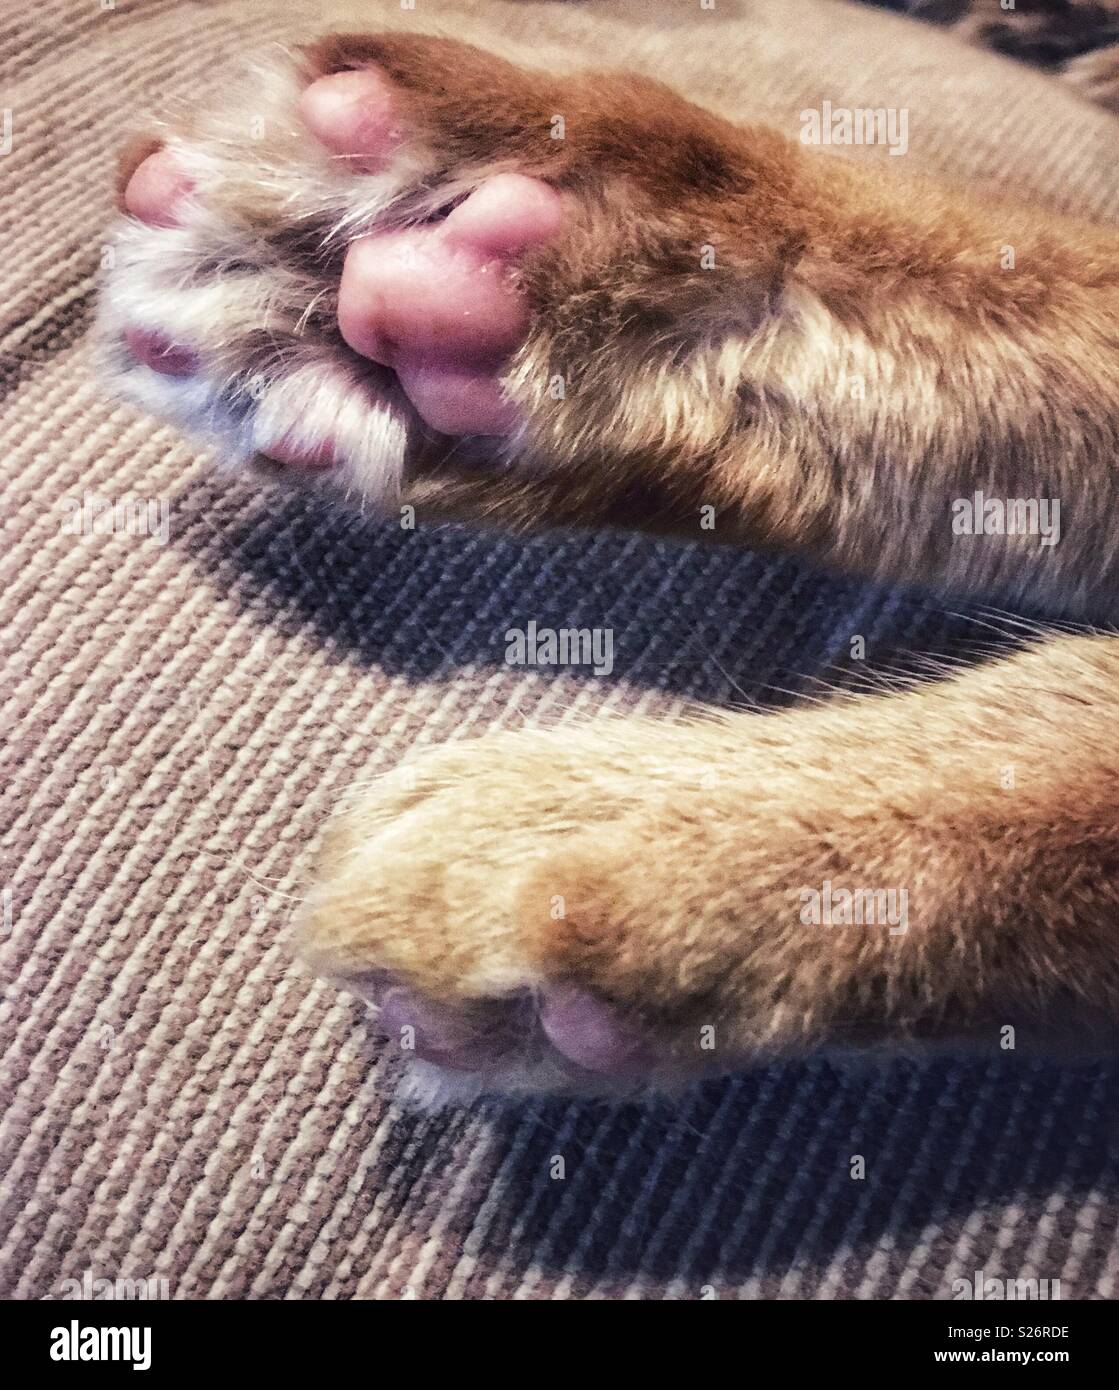 Pink paw pads on orange tabby cat with white toe fur Stock Photo - Alamy